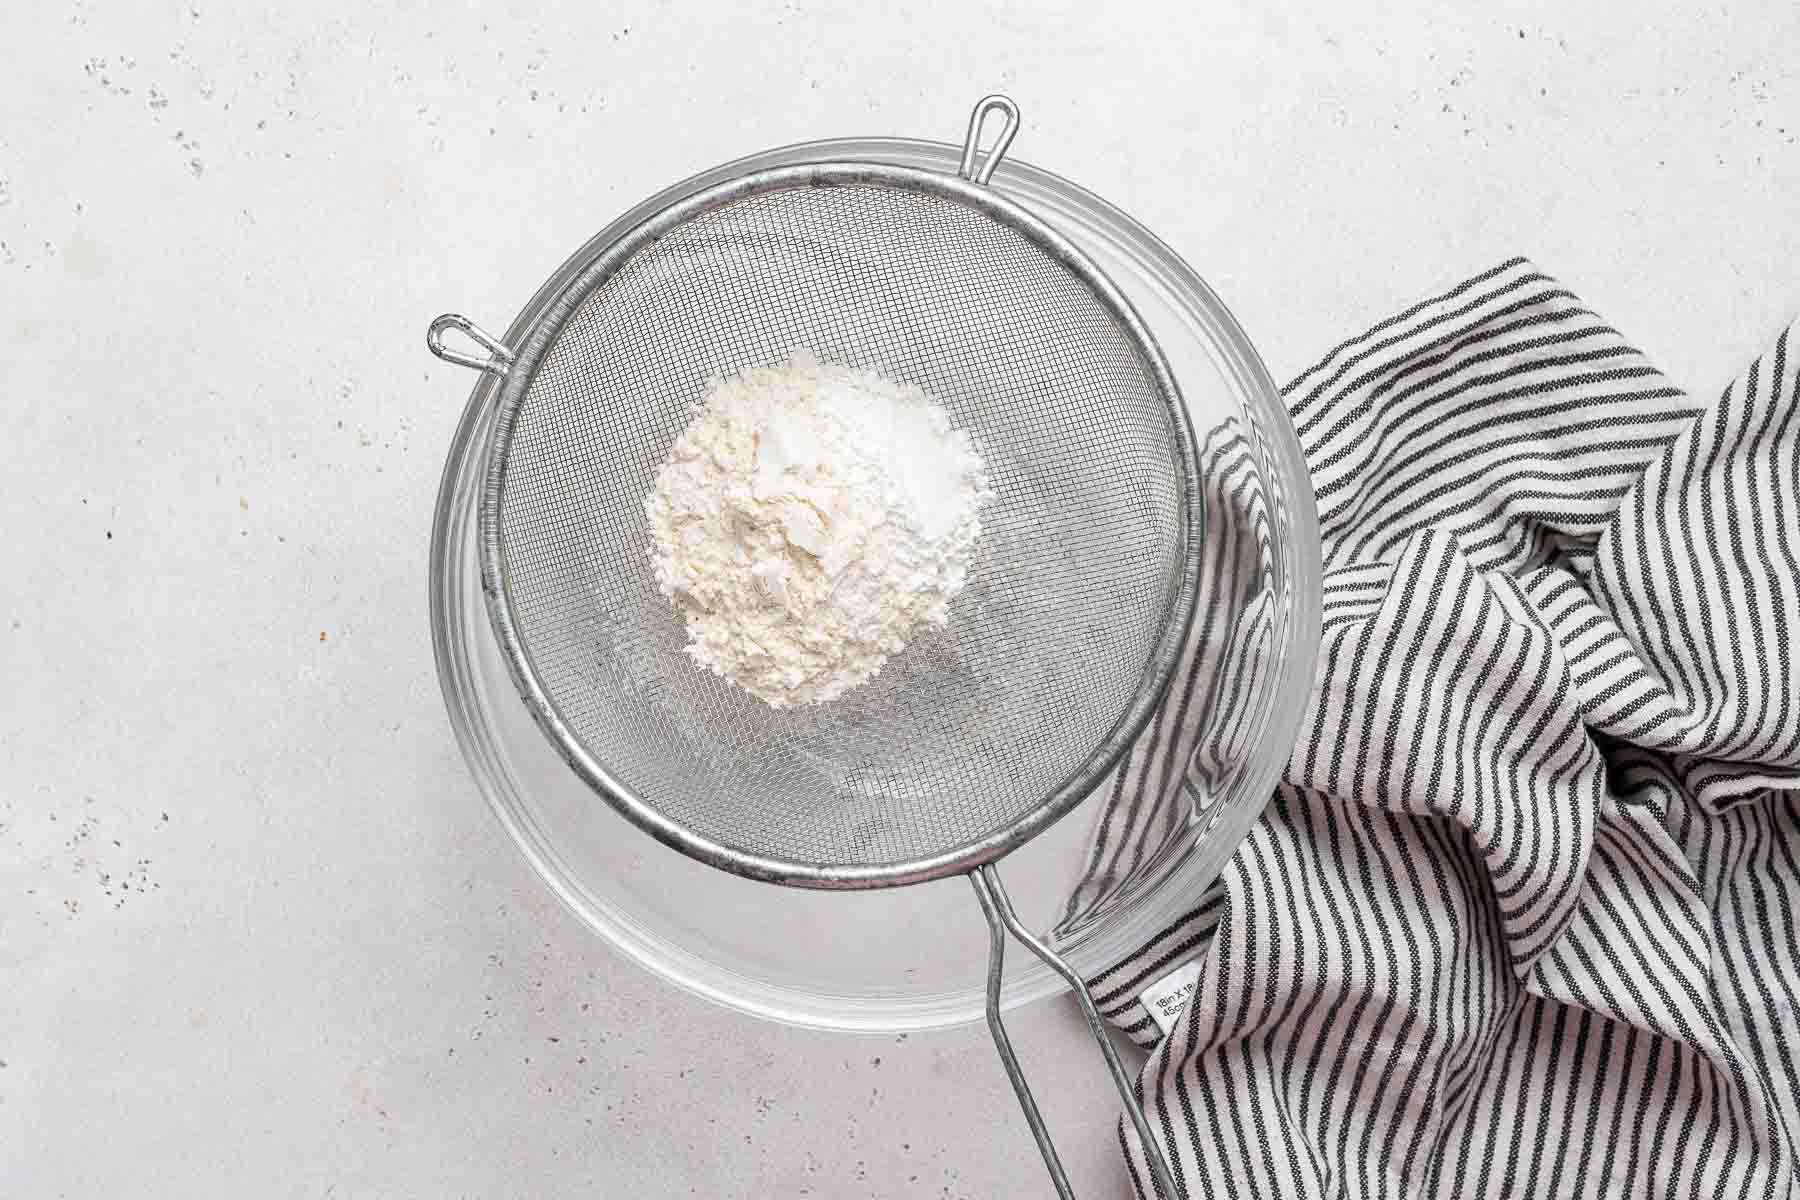 Sifting flour into a clear bowl.